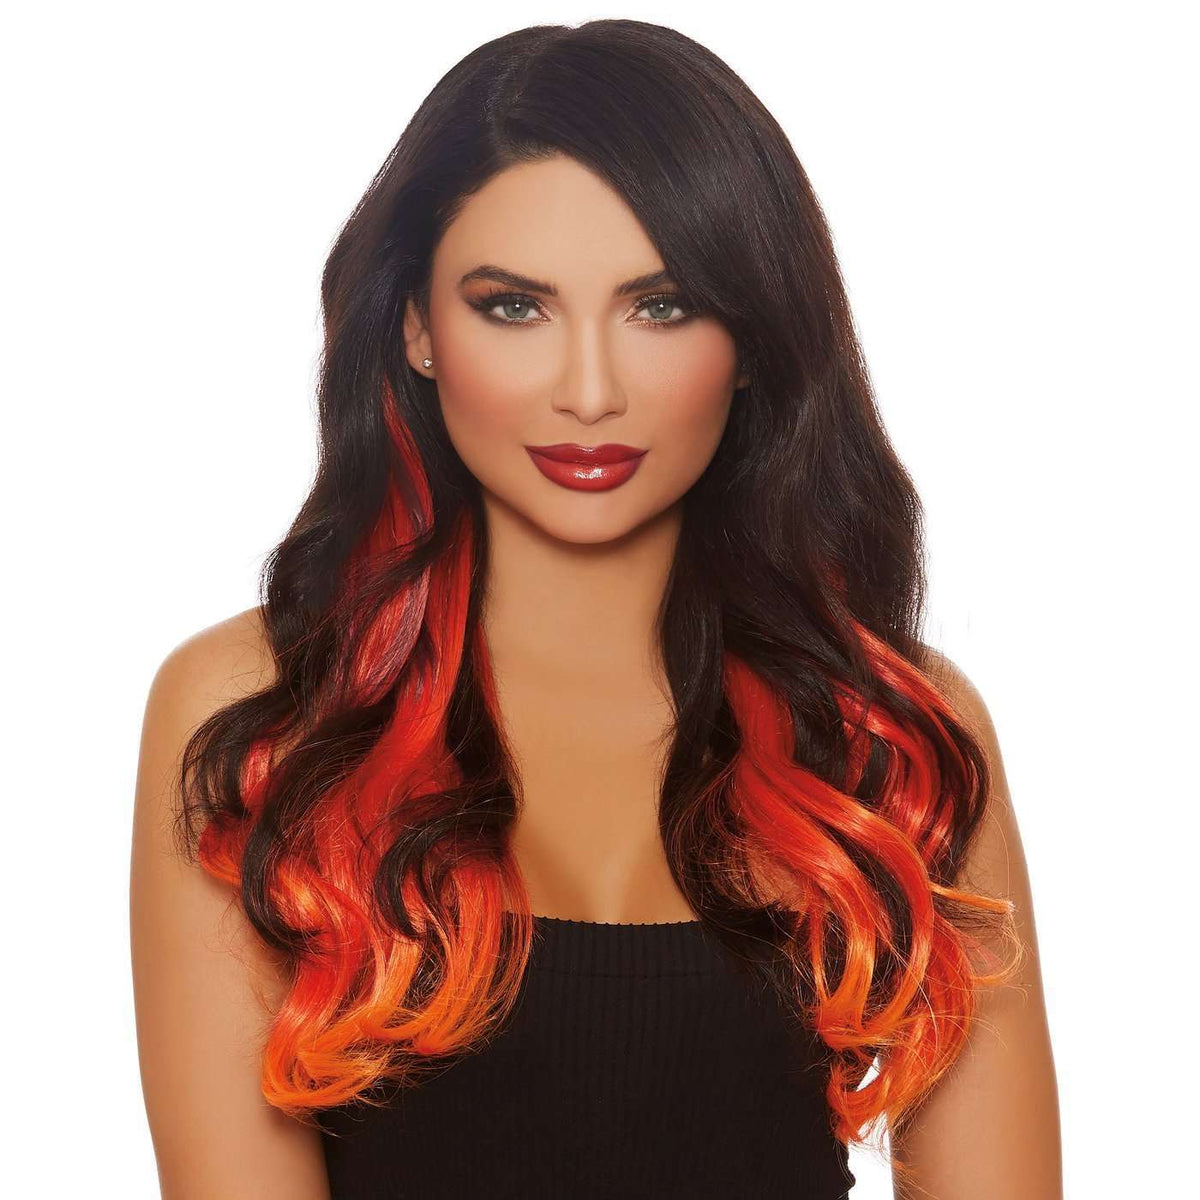 Multi-toned Long wavy Layered Three-Piece Hair Extensions